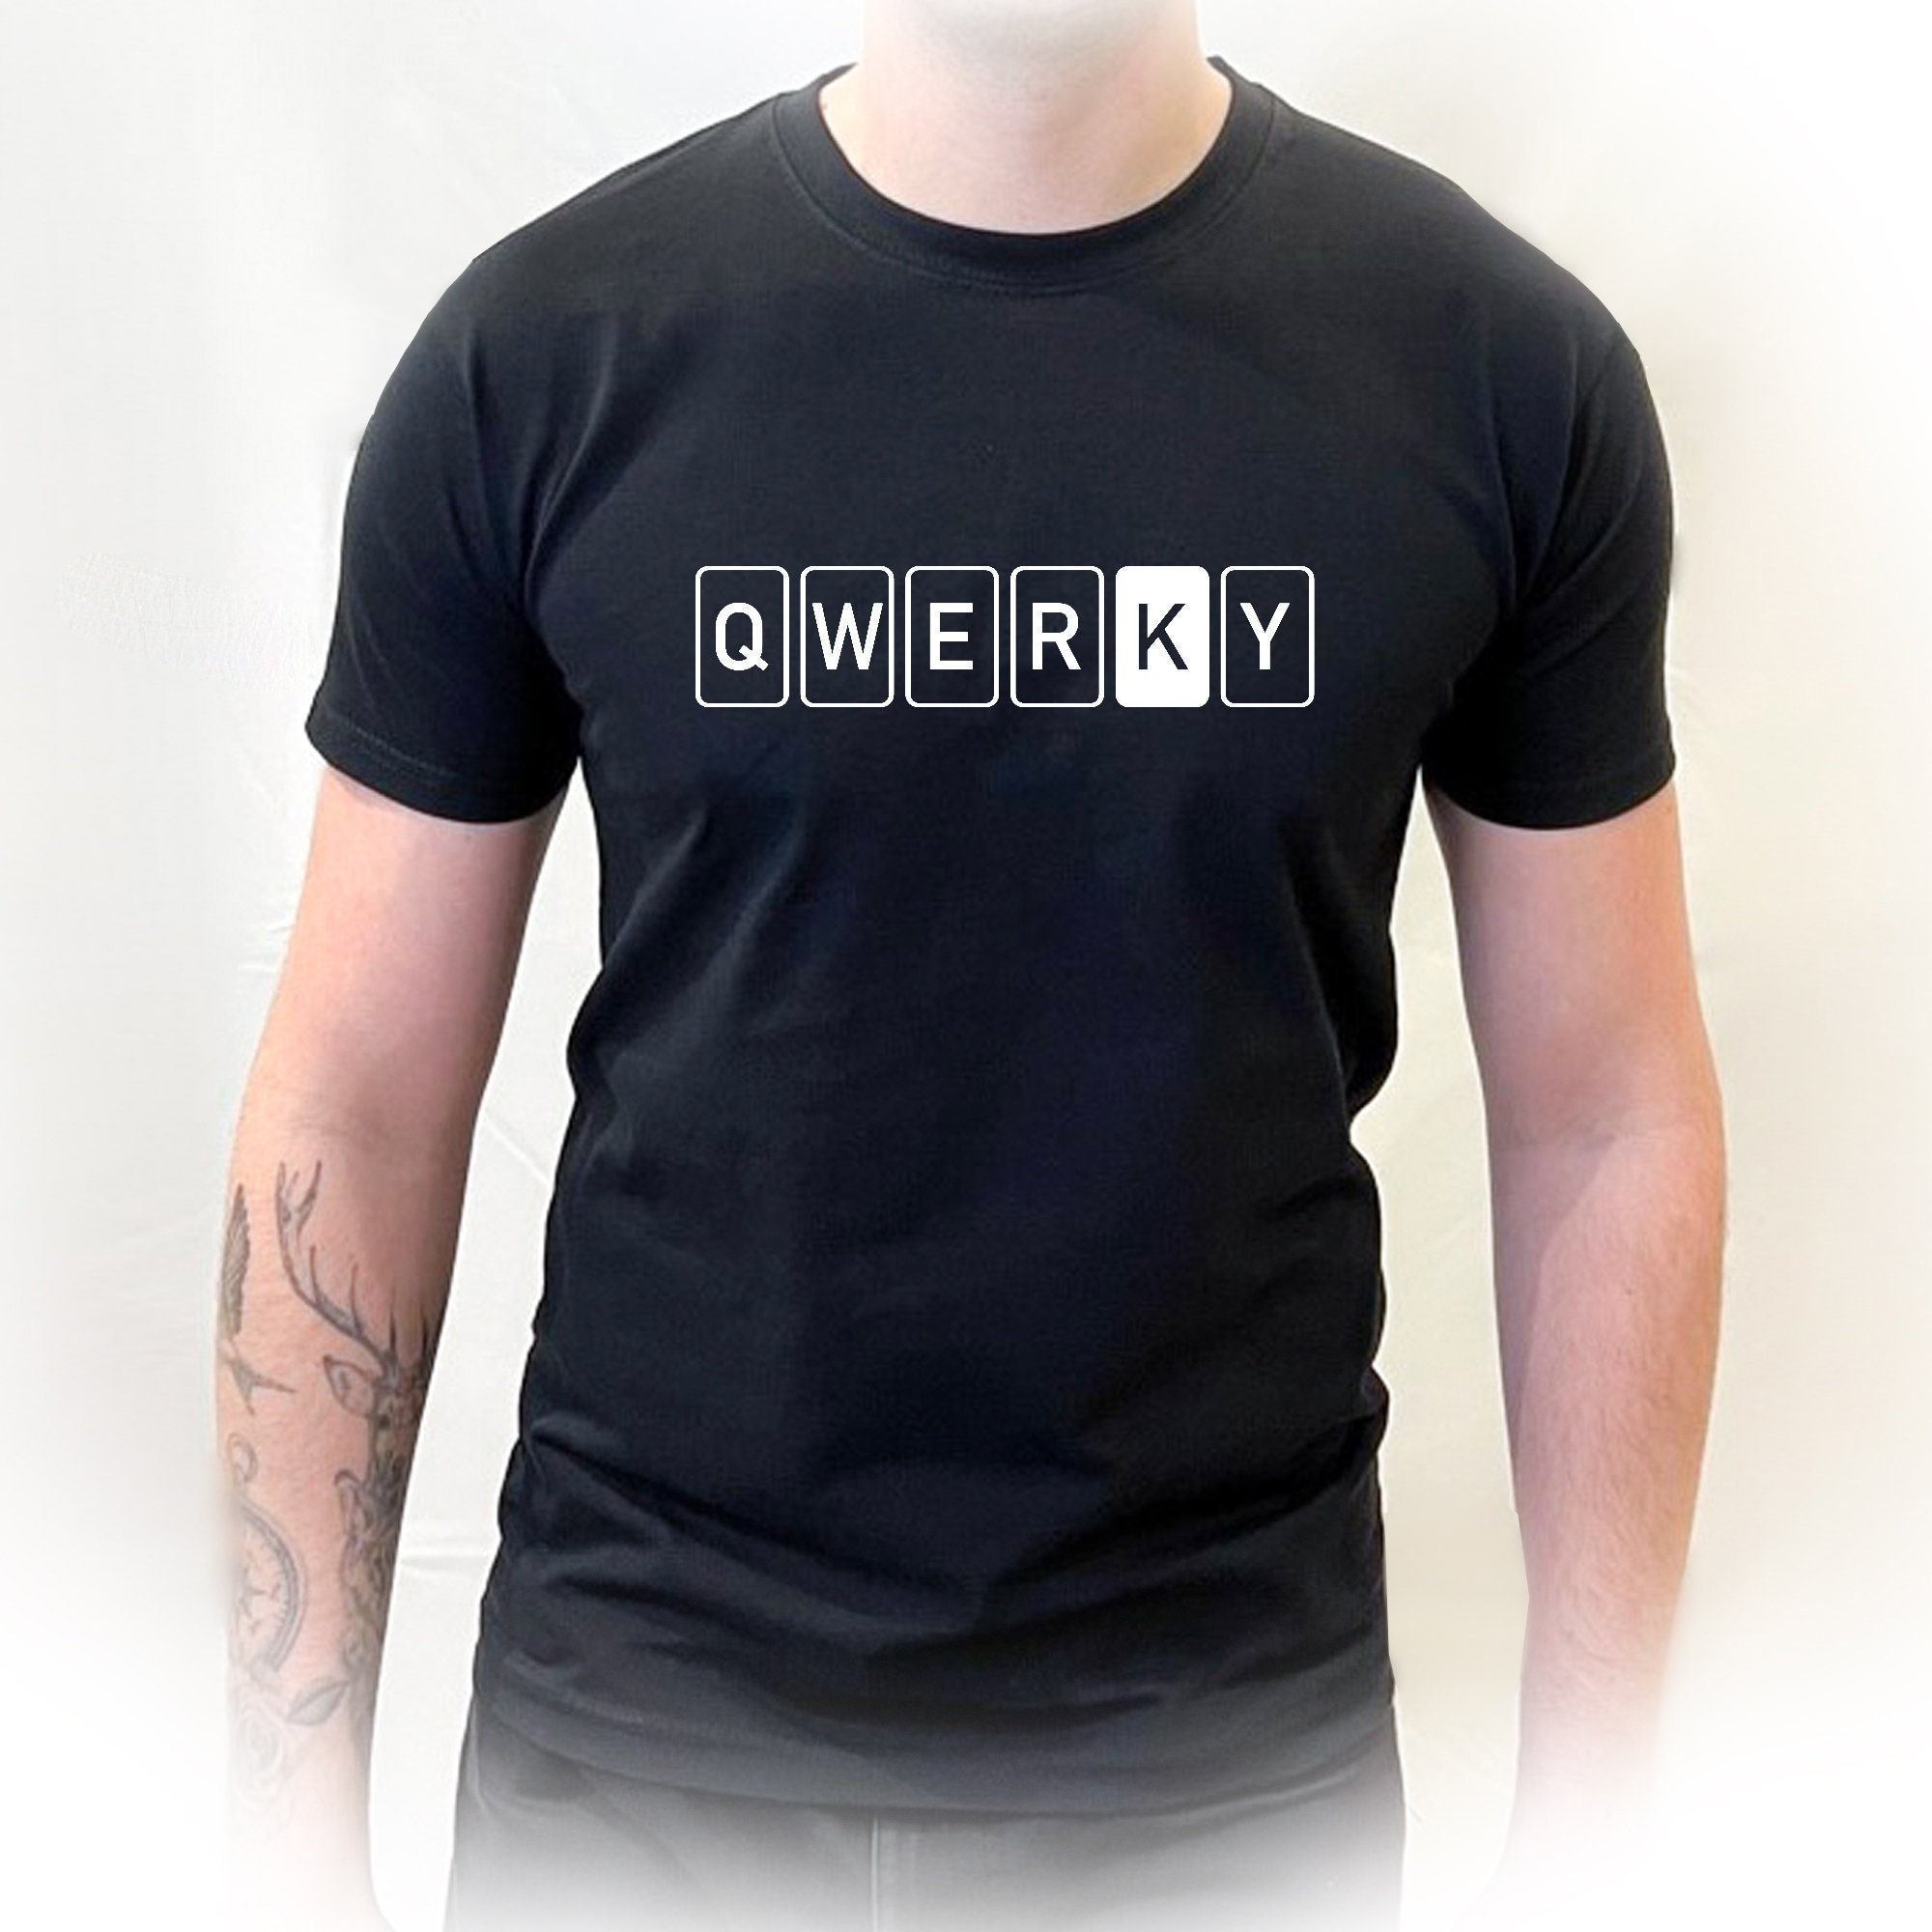 lidenskabelig Vugge Marco Polo Qwerky Tshirt Top Nerdy Qwerty / Quirky Tee - Etsy